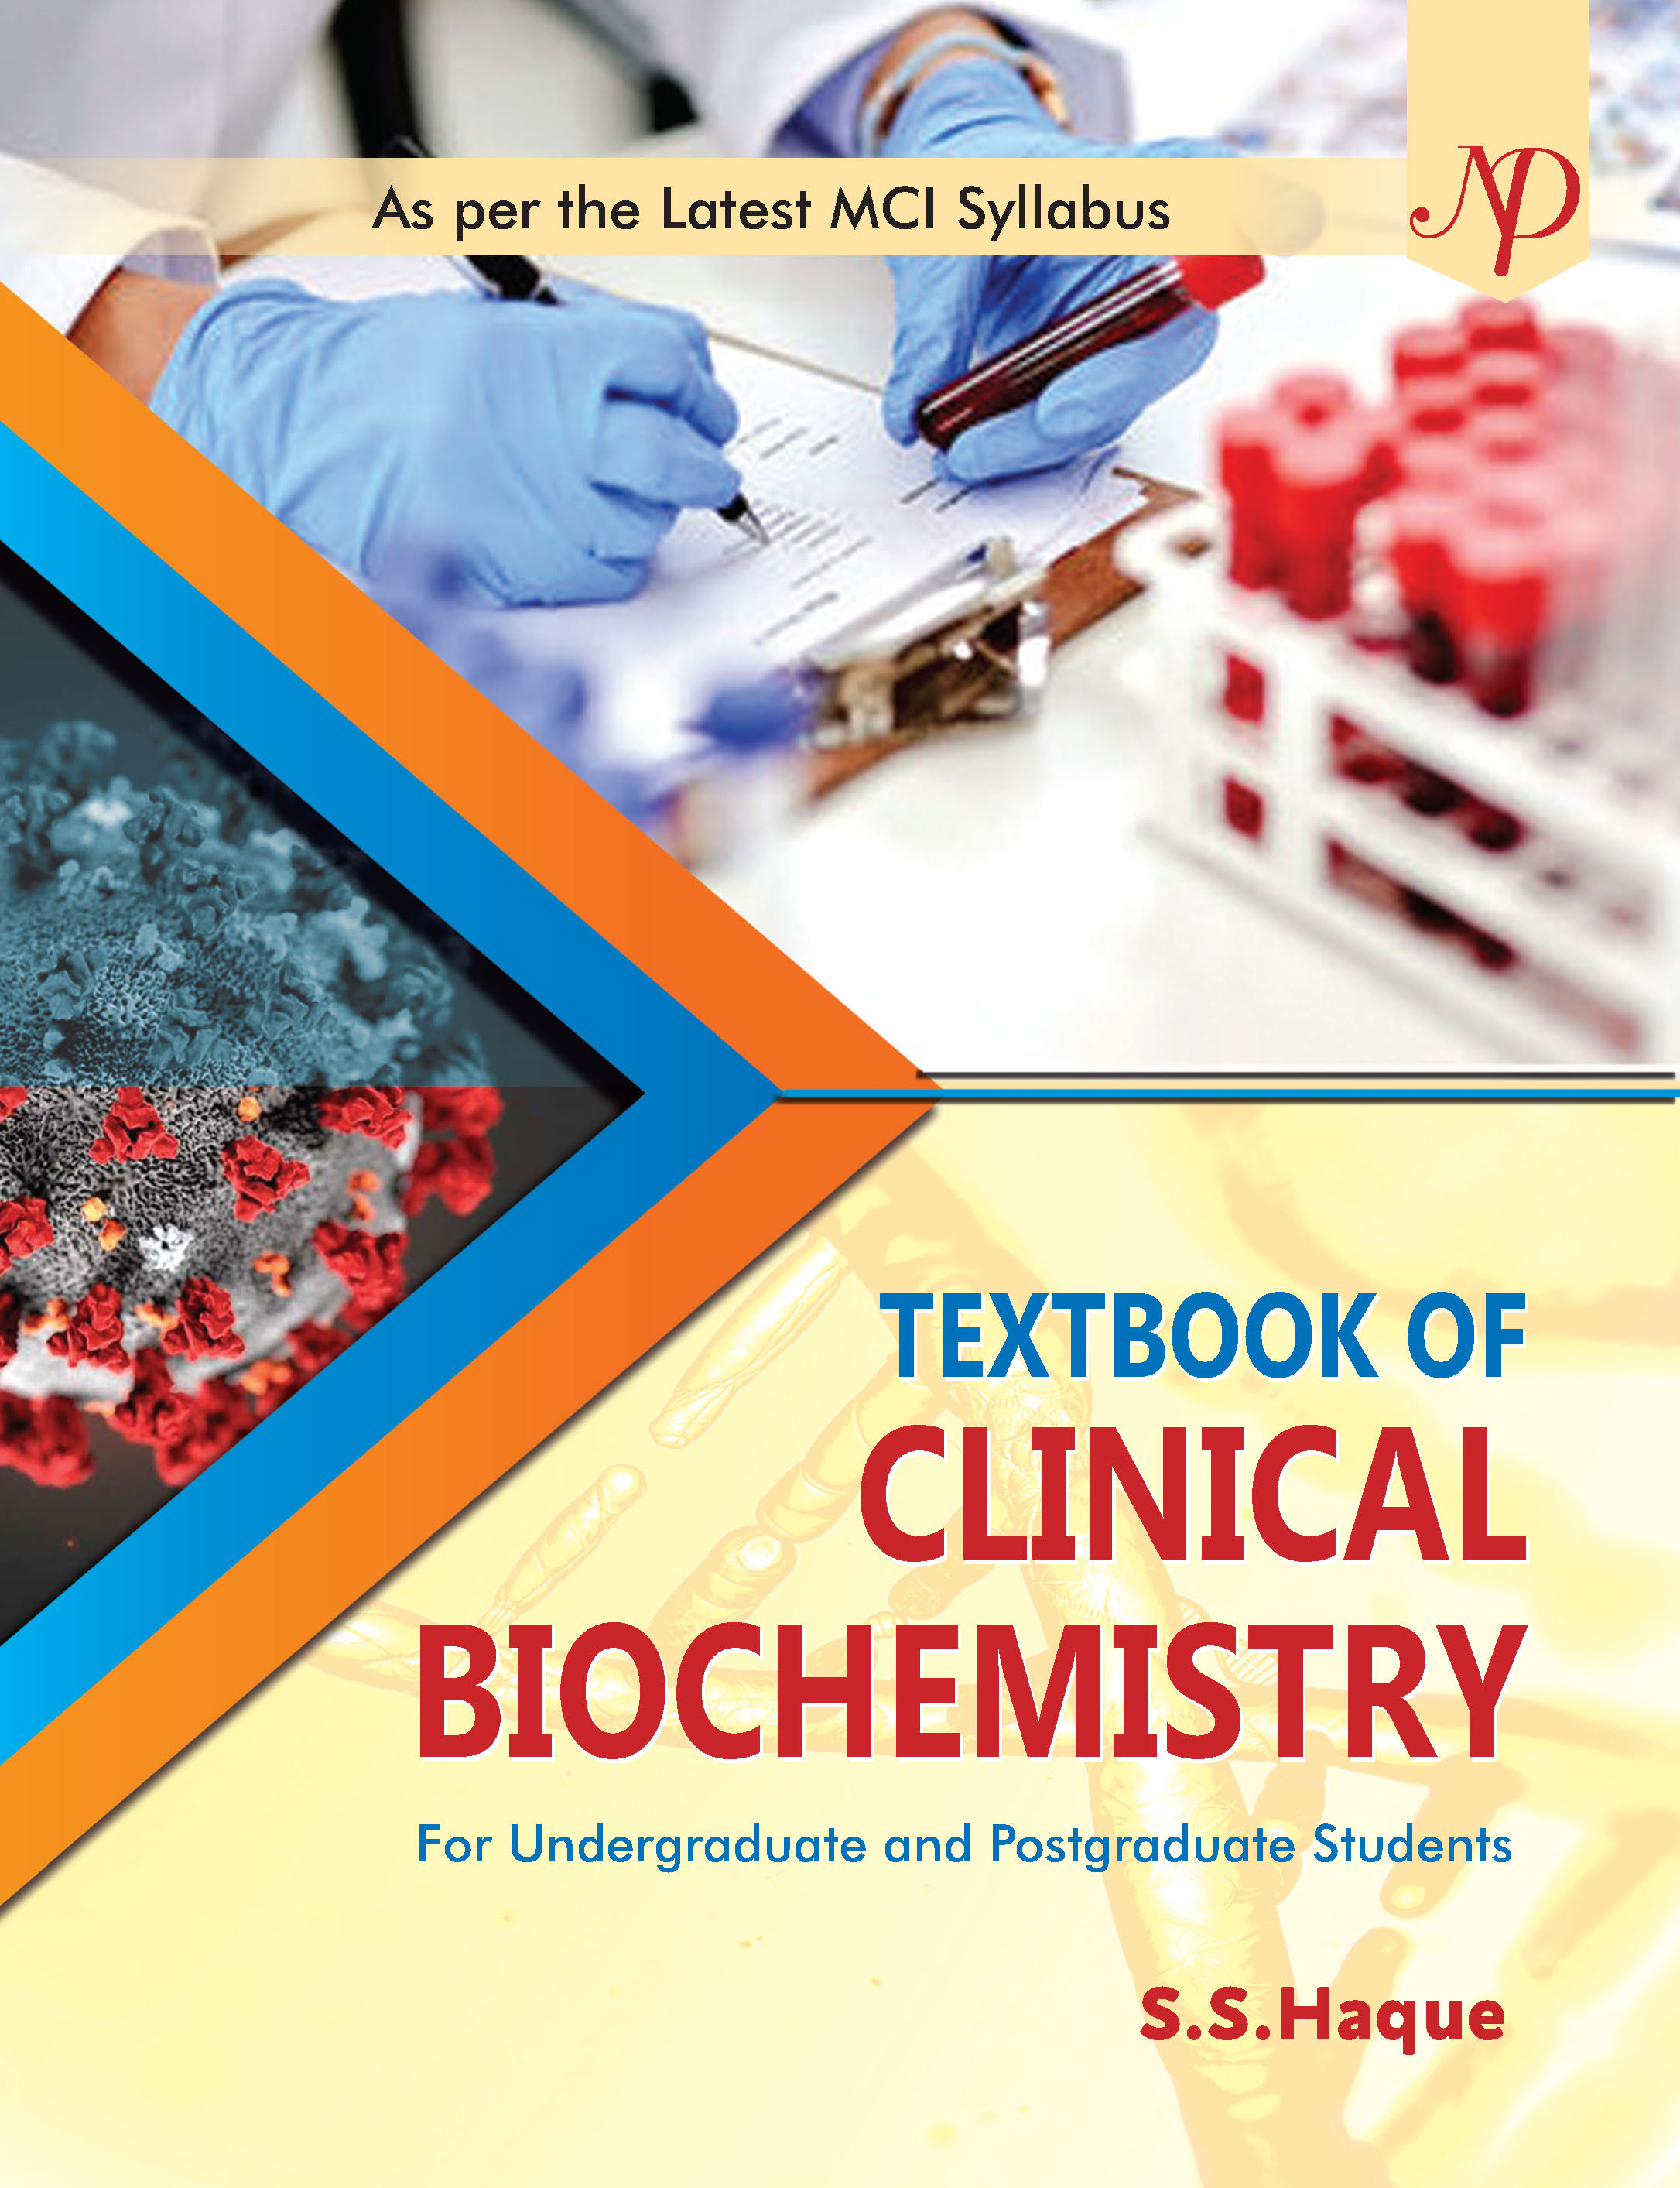 Textbook of clinacal Biochemistry Cover.jpg